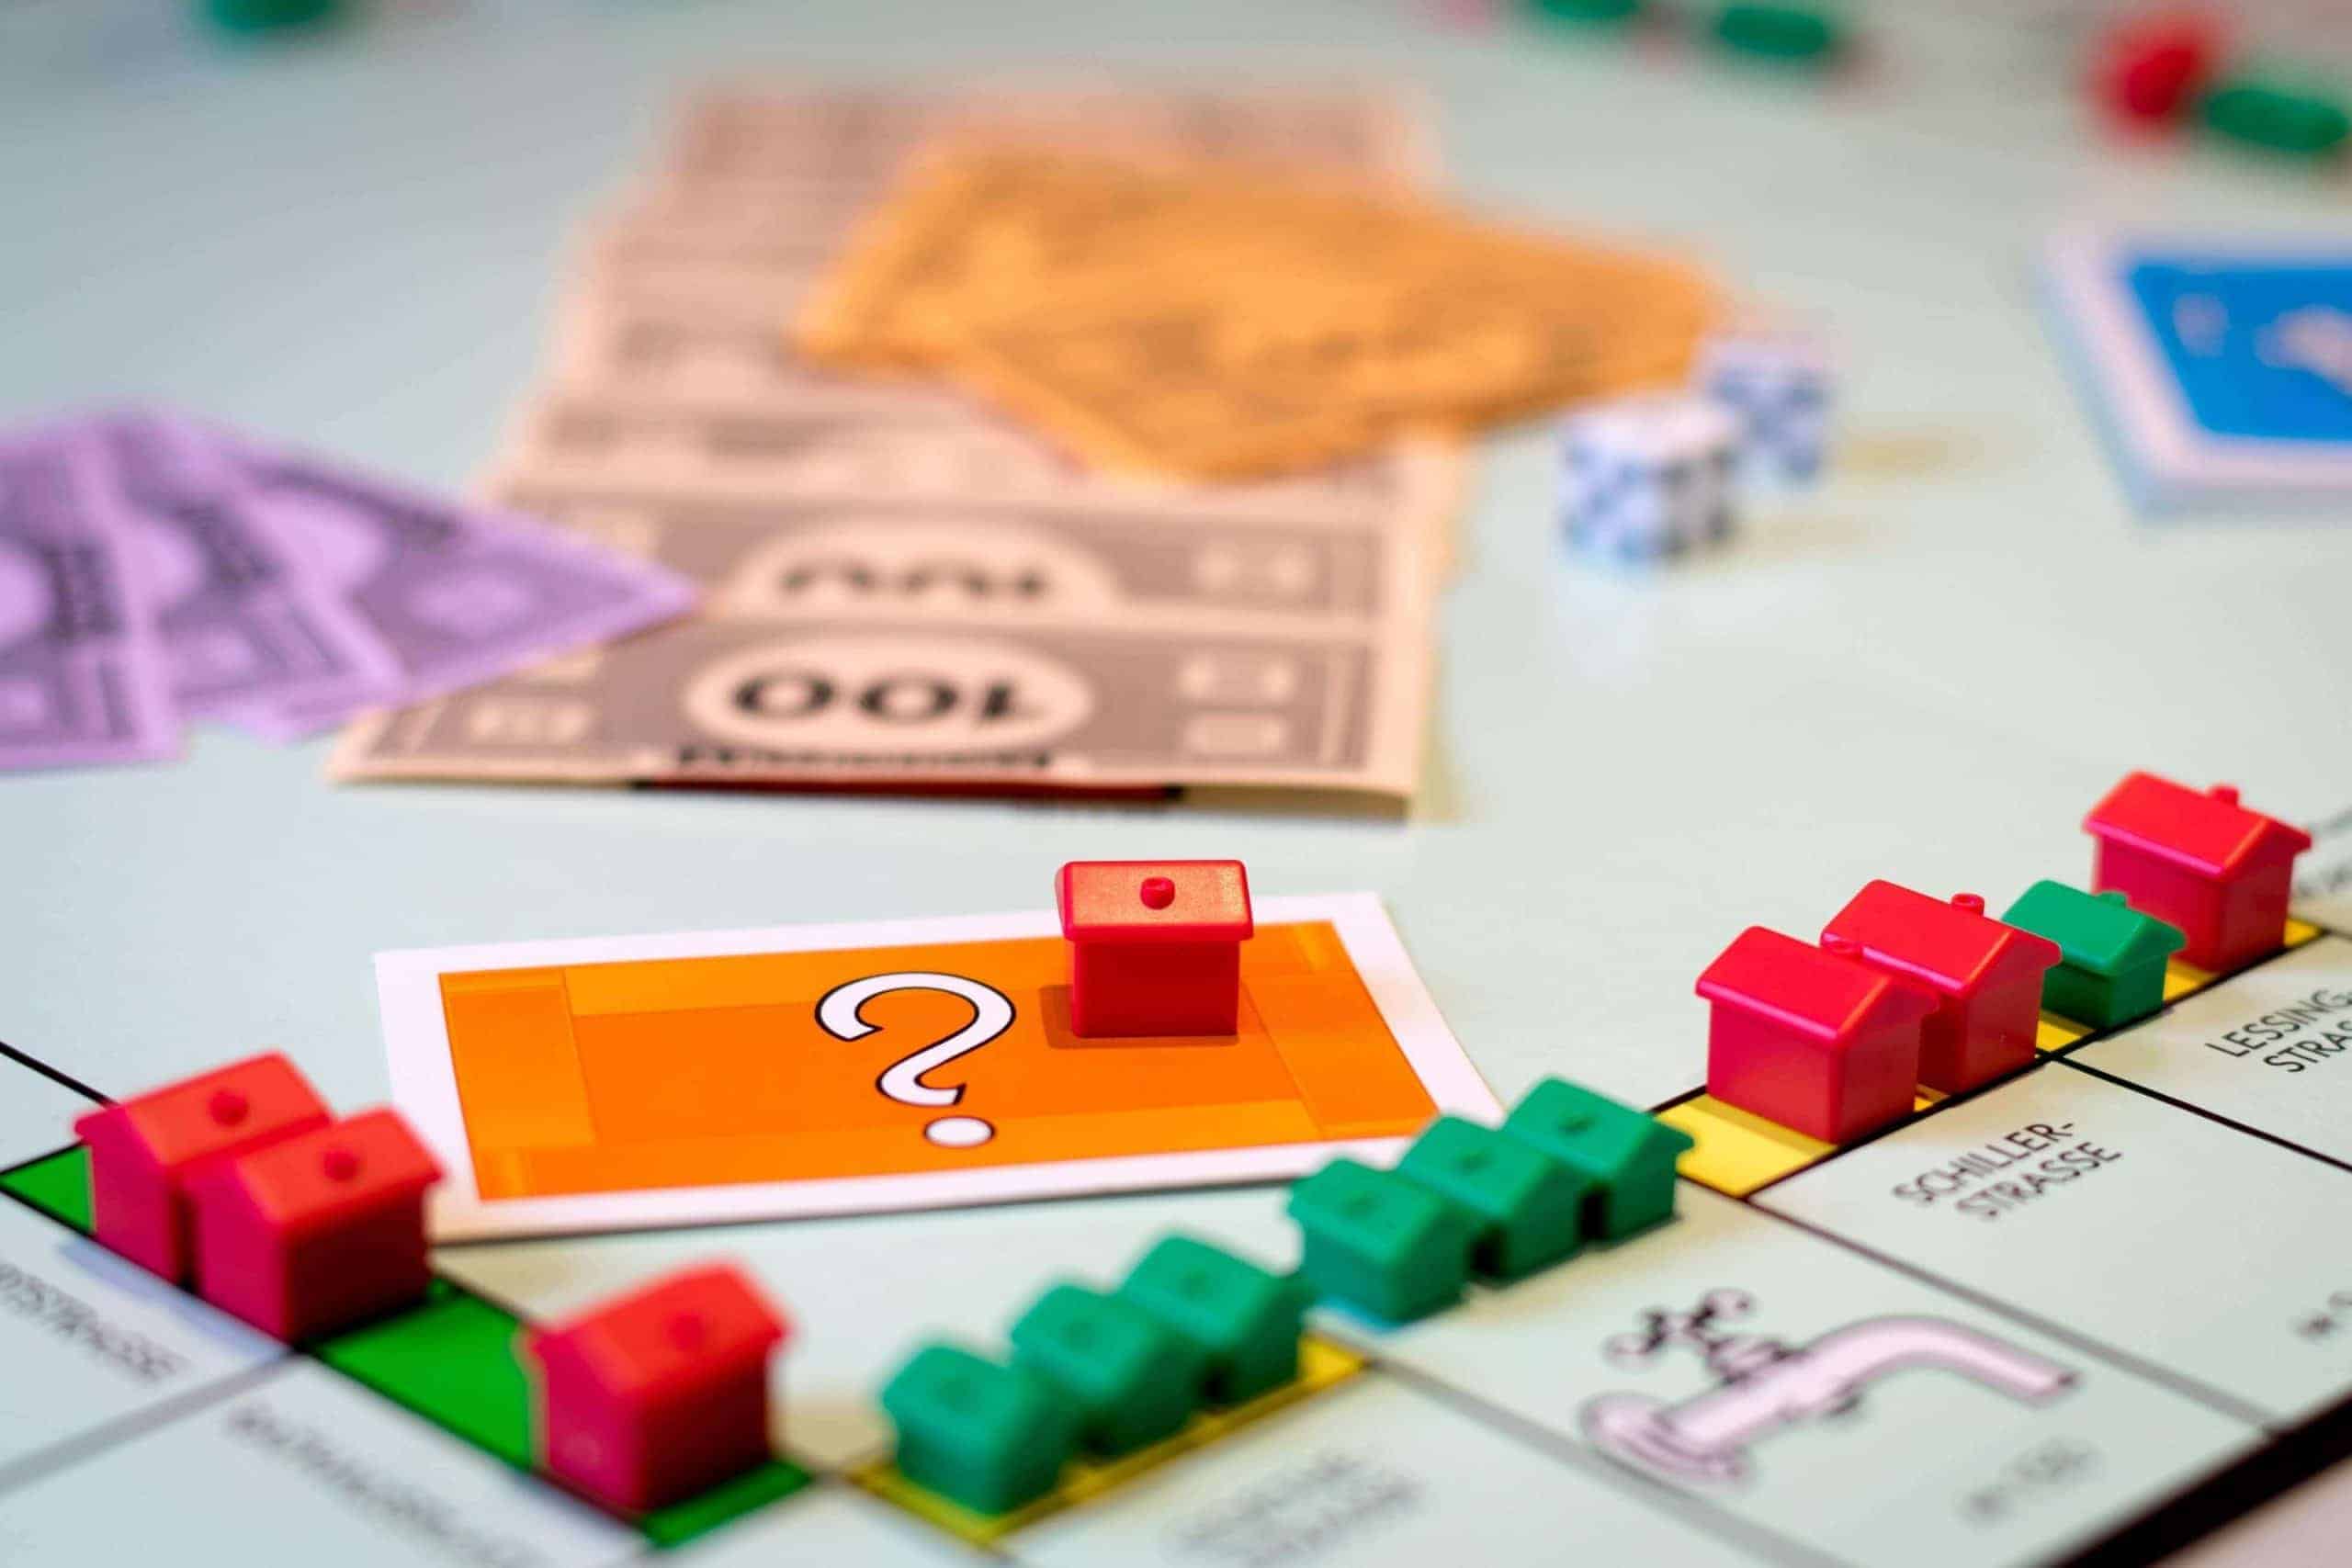 Monopoly board buying and selling auctions.